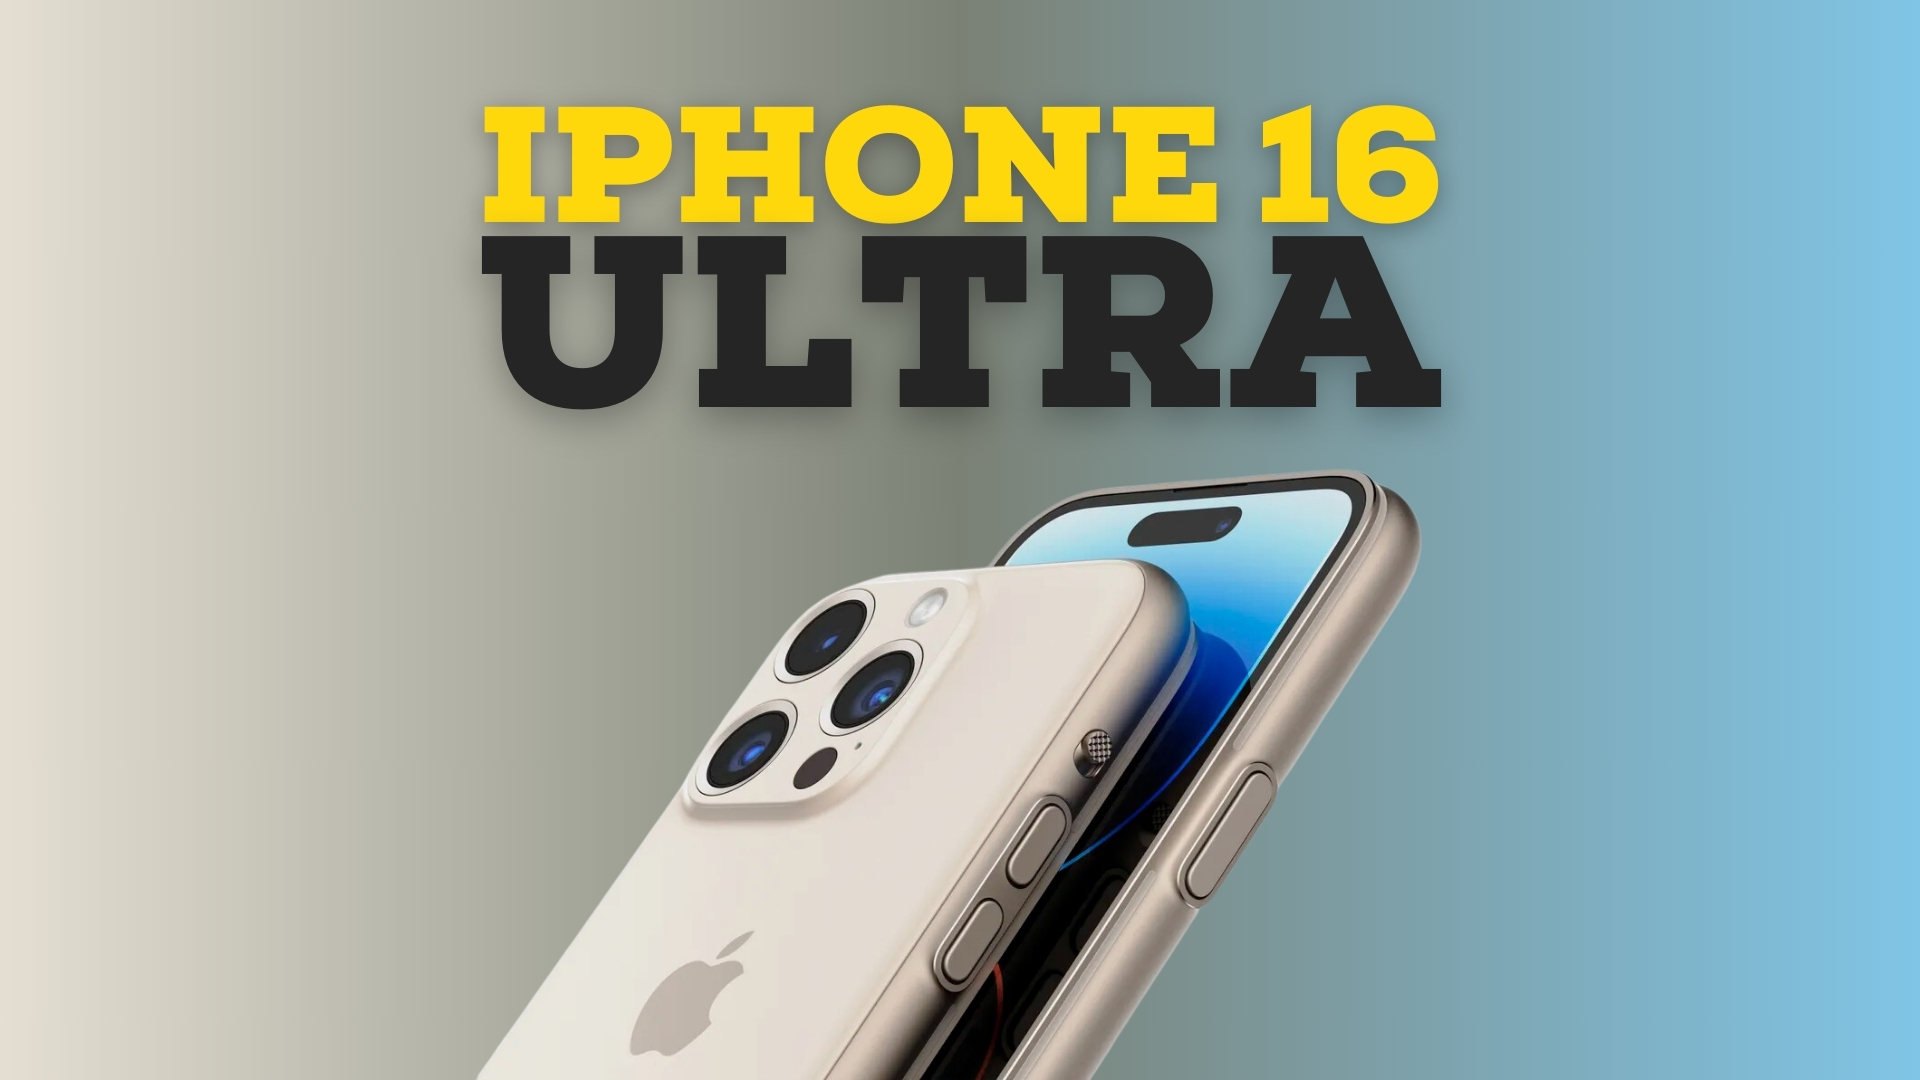 iPhone 16 Ultra: Release date rumors, news, and more